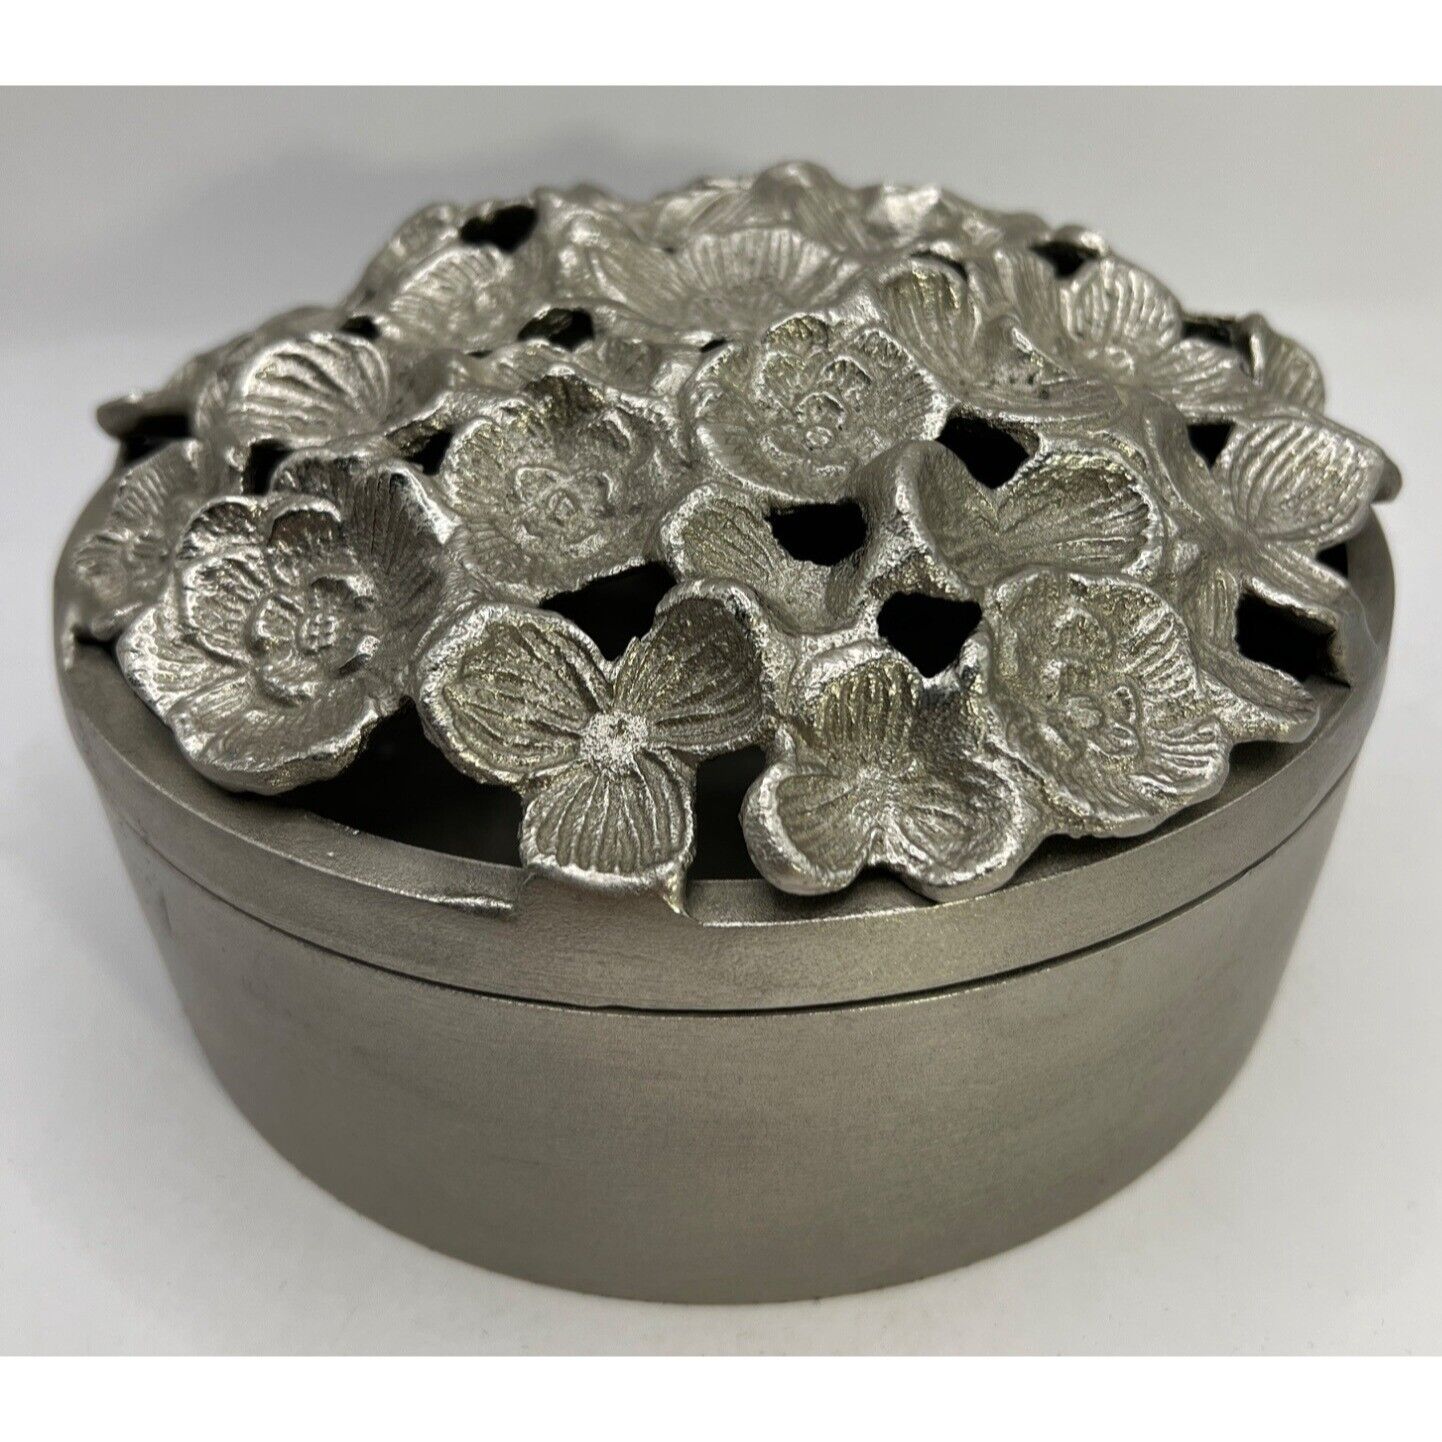 Solid 2 Piece Pewter Container W/ Lid Decor 3D Cutout Flowers, Dogwood Blooms